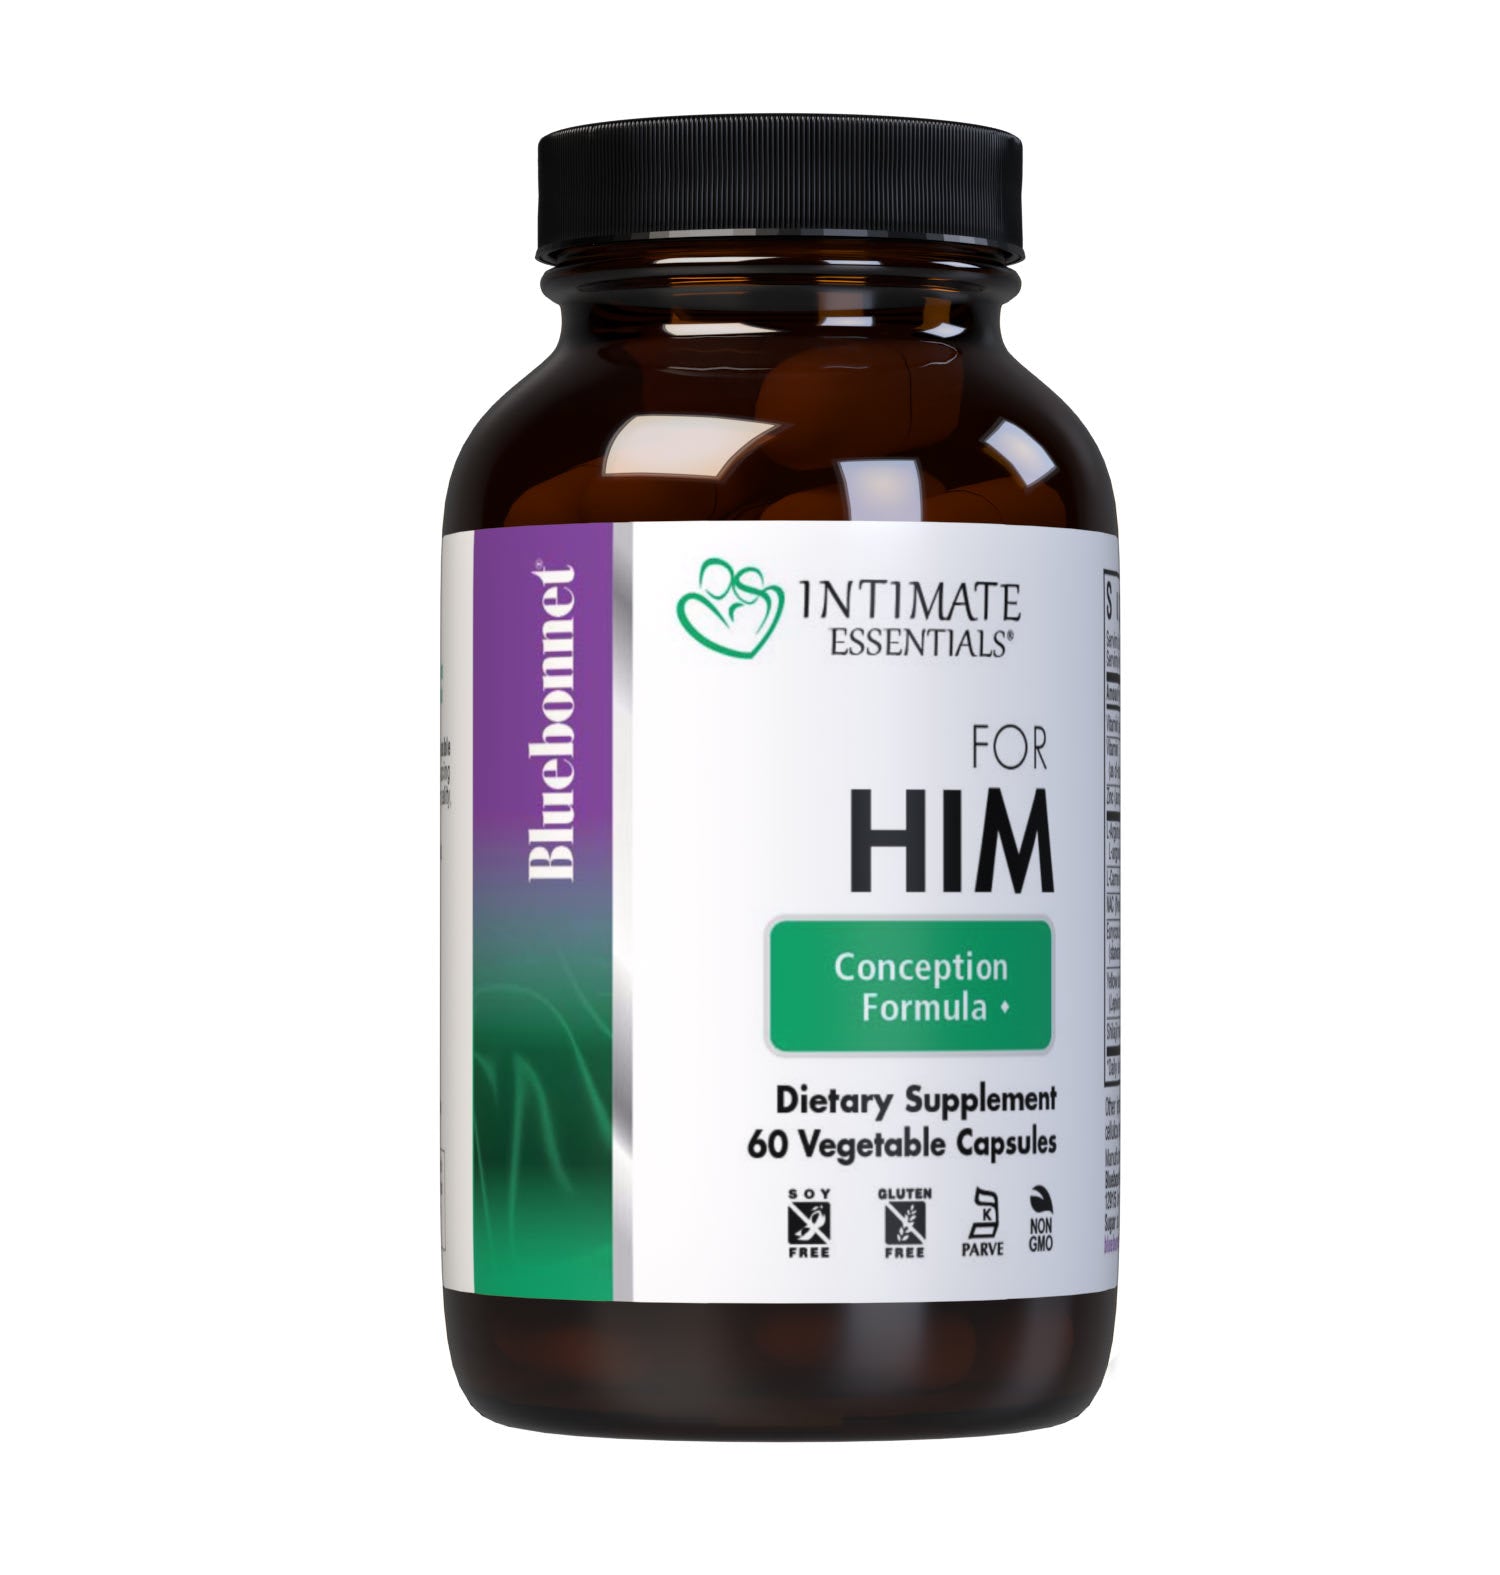 INTIMATE ESSENTIALS CONCEPTION FORMULA FOR HIM 60 vegetable capsules May Support Testosterone levels & Healthy Sperm. #size_60 count